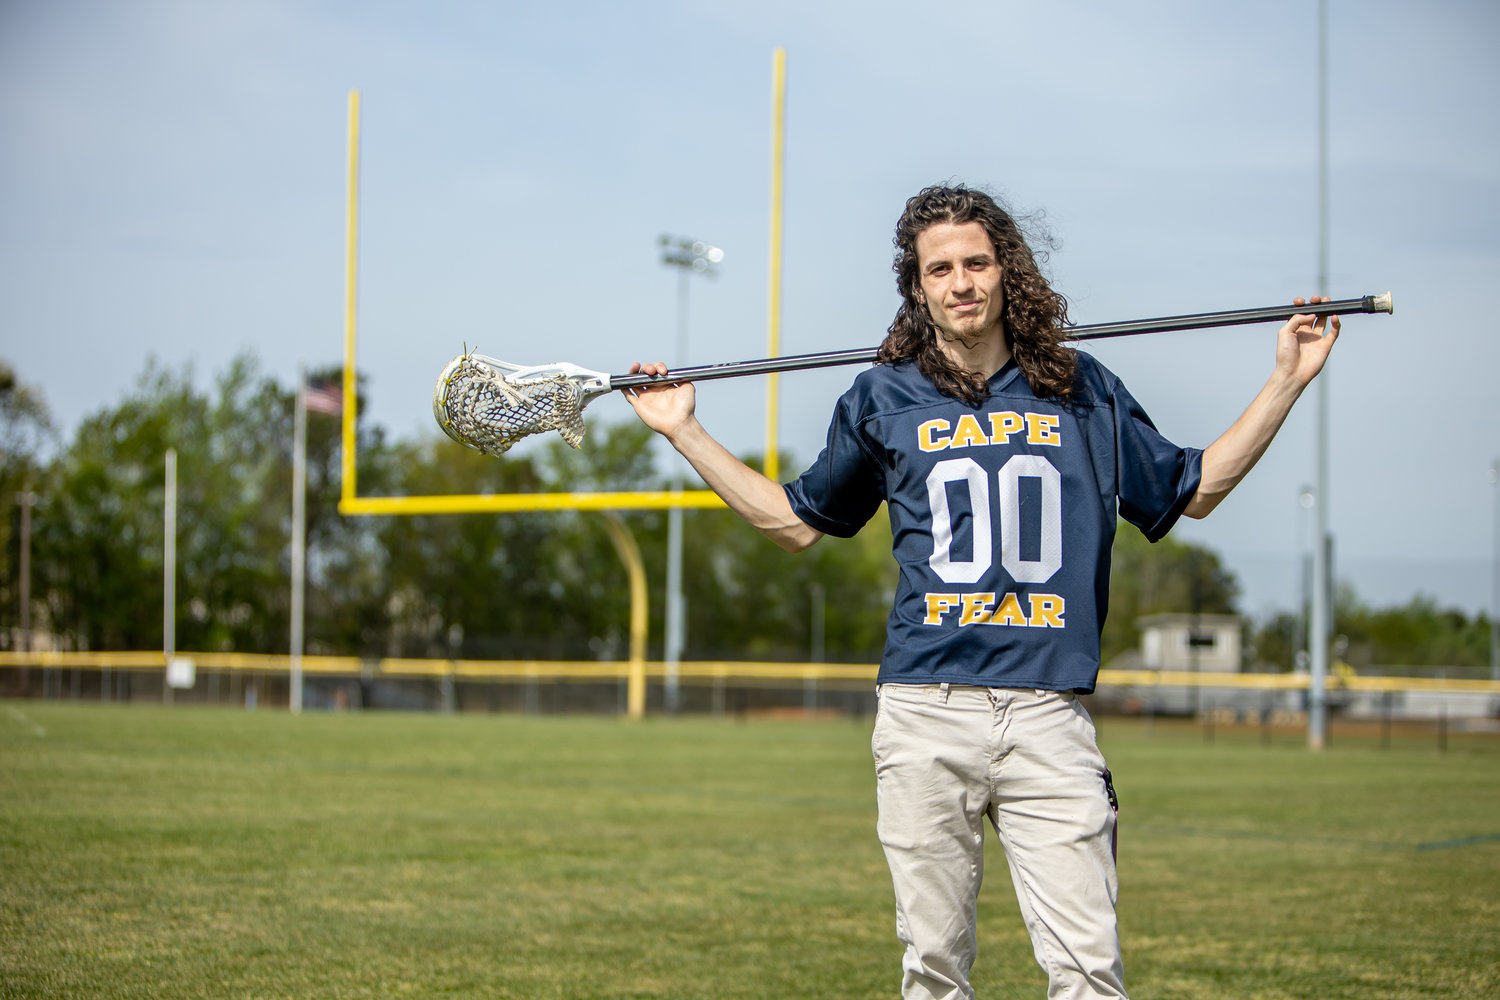 Jedidiah 'Jed' Coon was captain of the lacrosse team in his senior year at Cape Fear High School.